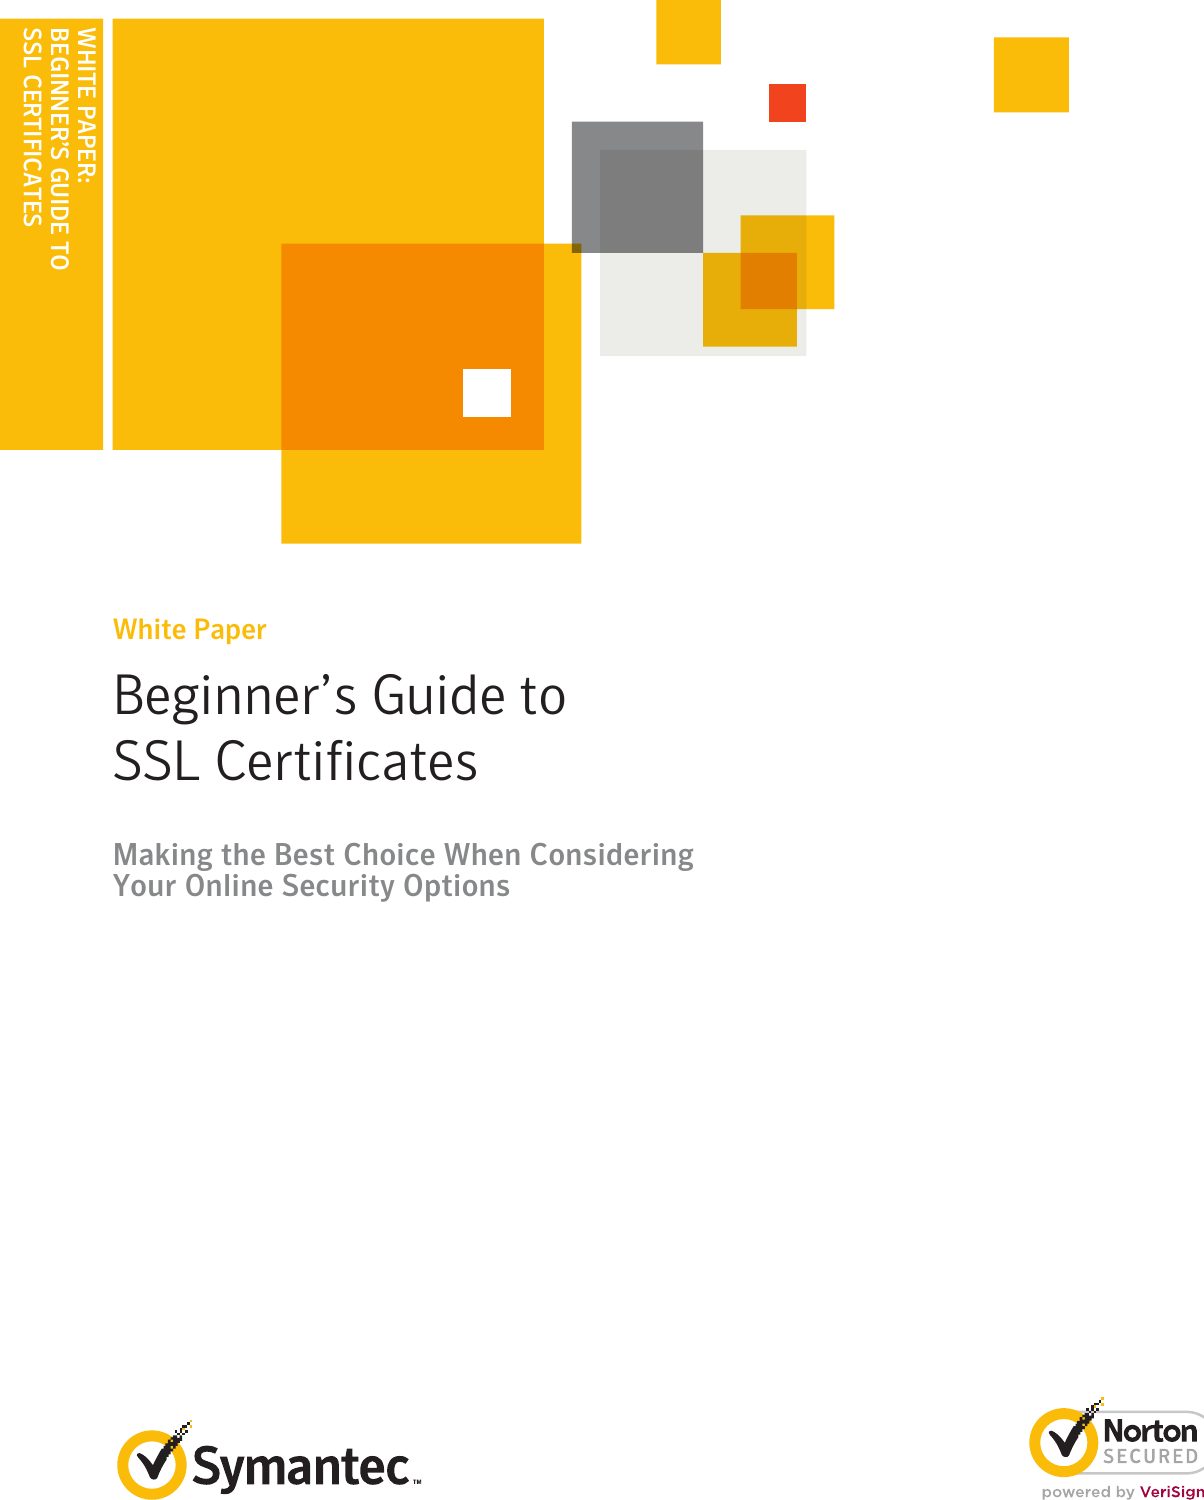 Page 1 of 8 - Beginners-guide-to-ssl-certificates